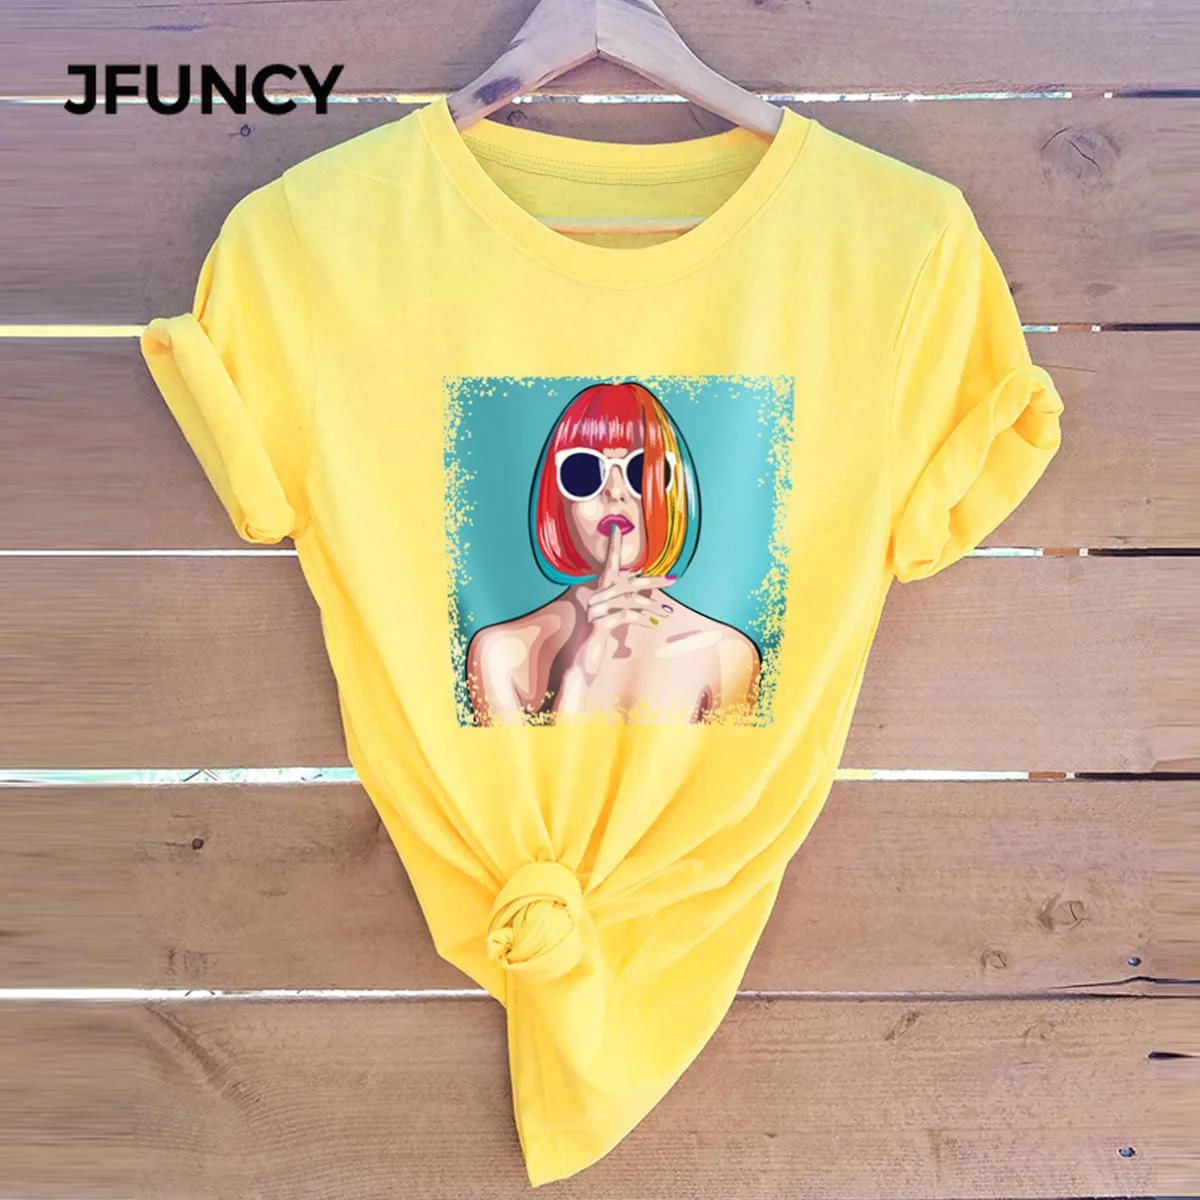 JFUNCY Summer 100% Cotton T-shirts Women Casual Tshirt  Female Tops Please Quiet Letter Printing Harajuku Graphic Tee